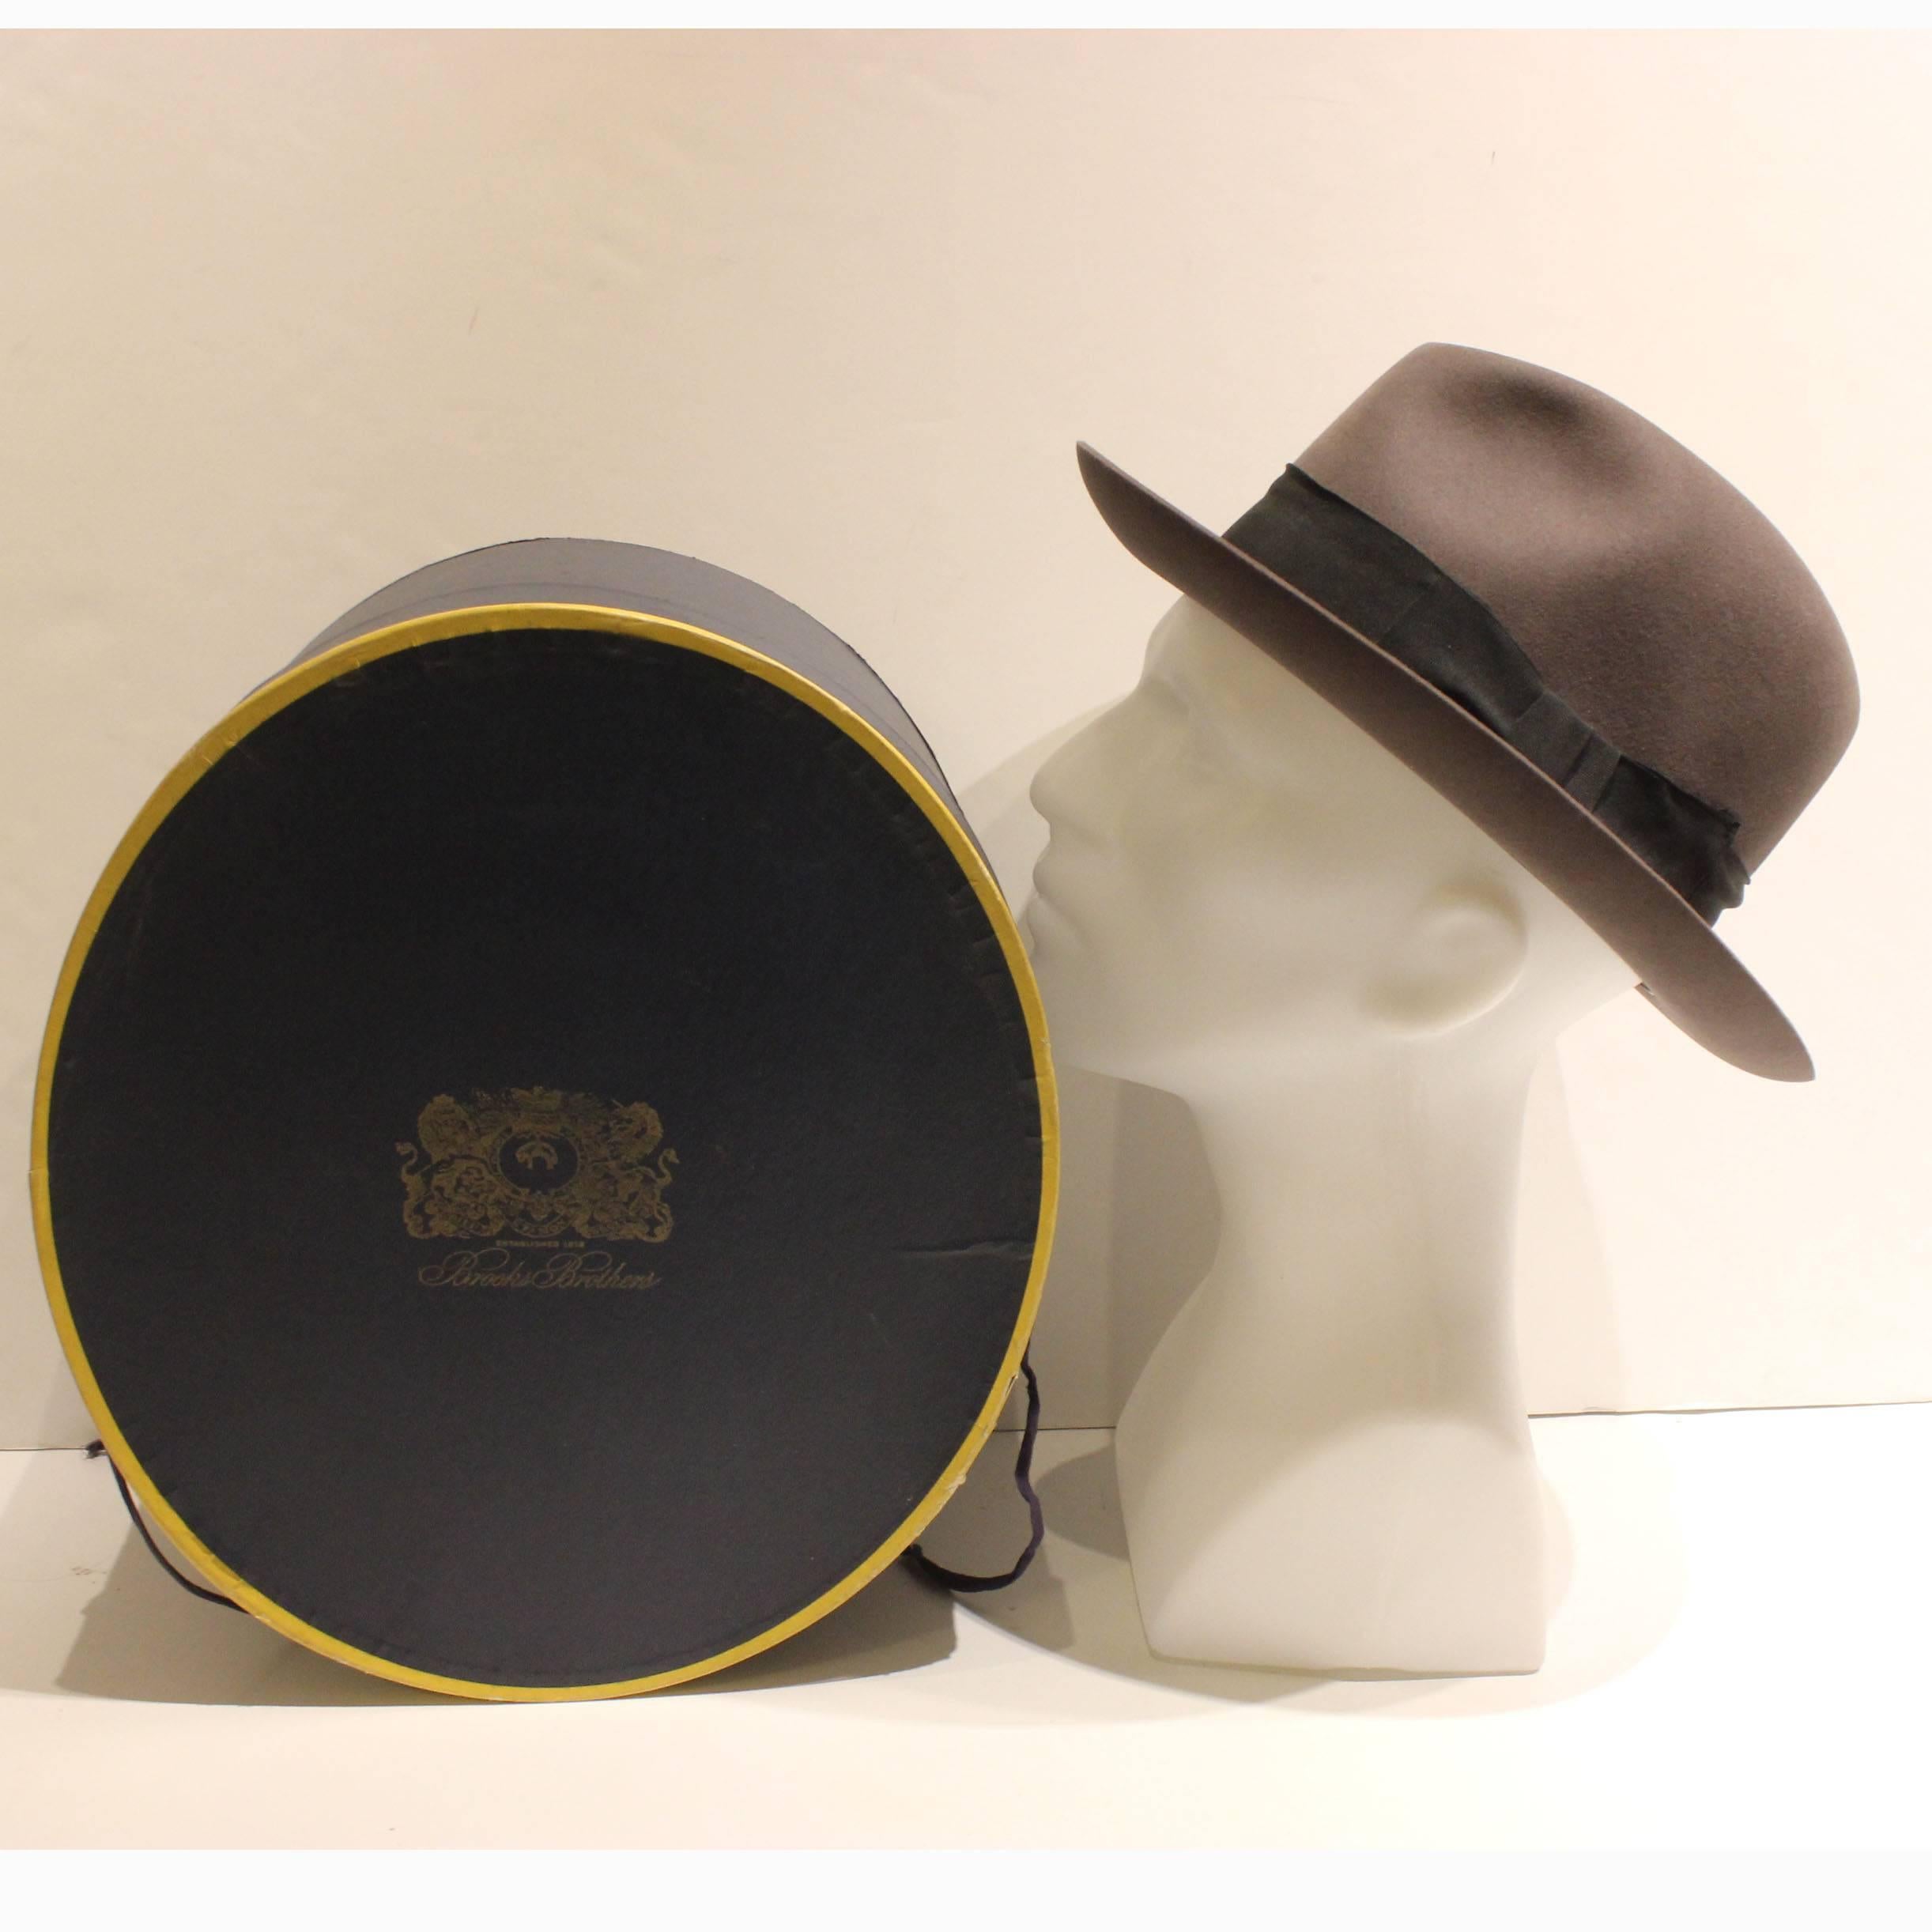 Classic, timeless Fedora. Gray with grosgrain black band. 7-1/4 hat size. This hat comes with its original blue and gold box from Brooks Brothers, which dates as pre-1963.  The hat box is in good condition, but the box top has experienced some wear